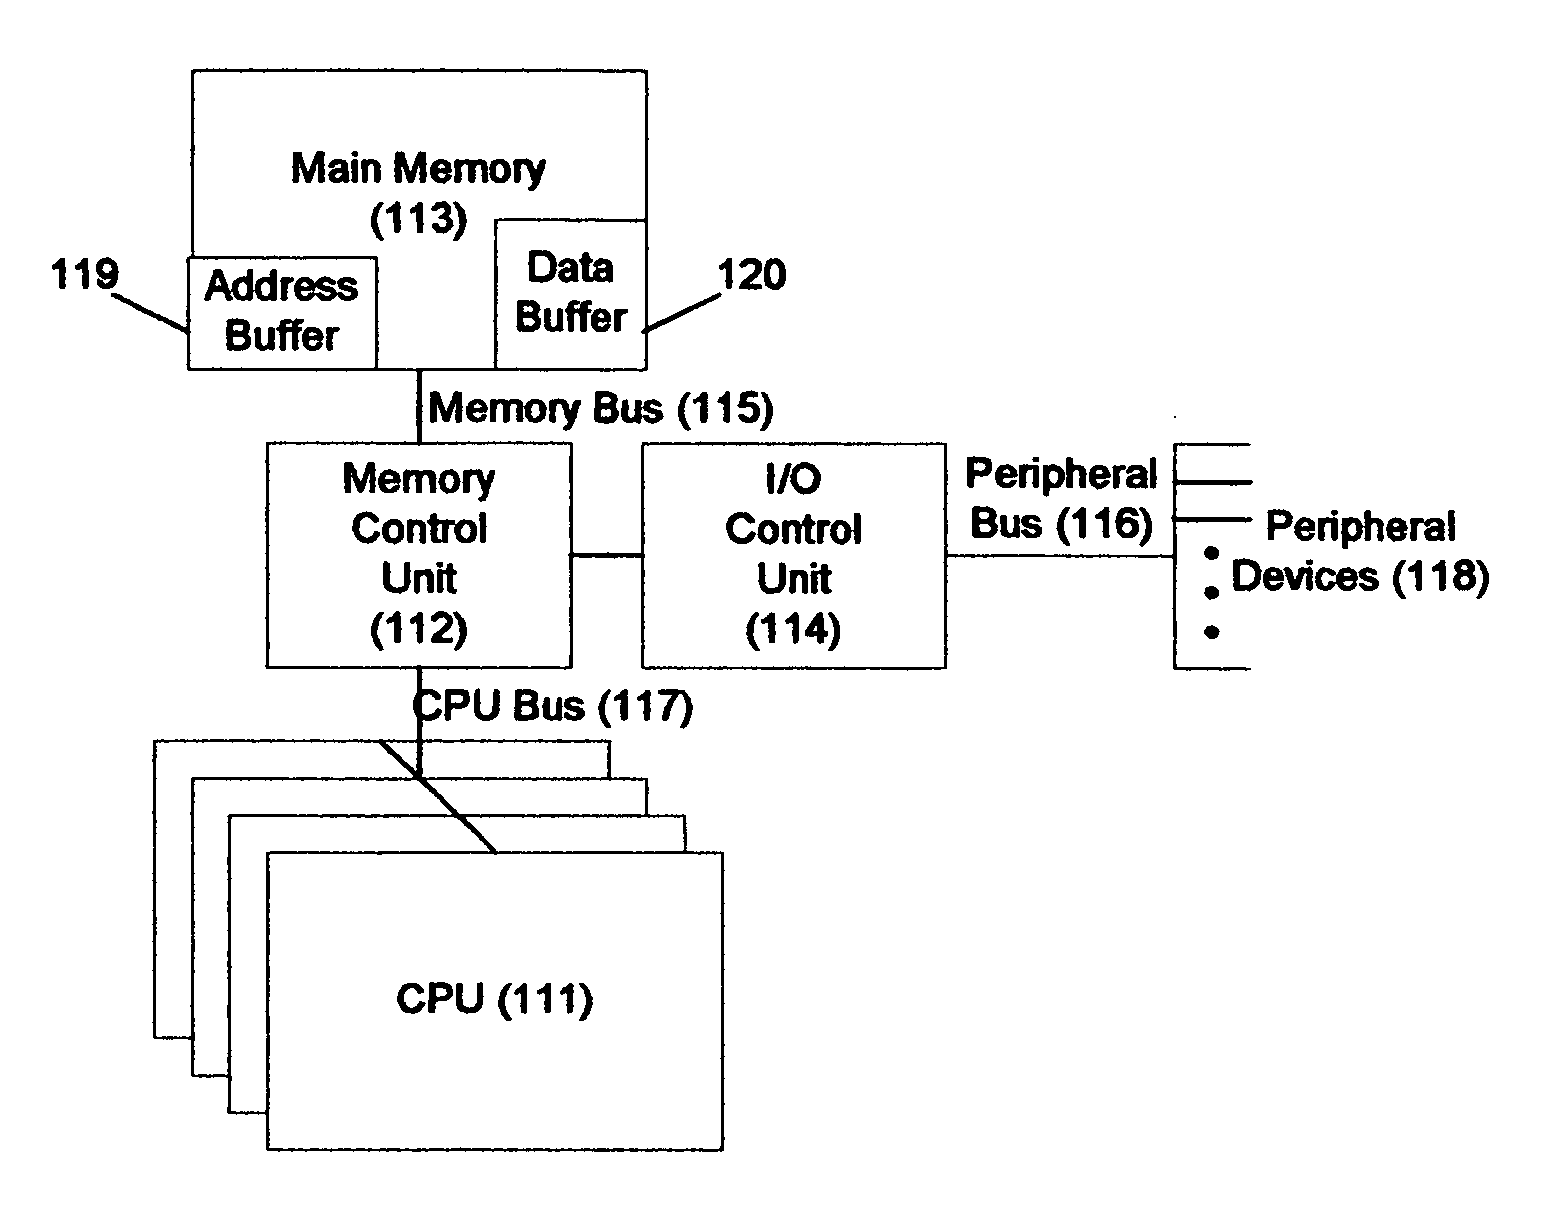 Memory-controller-embedded apparatus and procedure for achieving system-directed checkpointing without operating-system kernel support